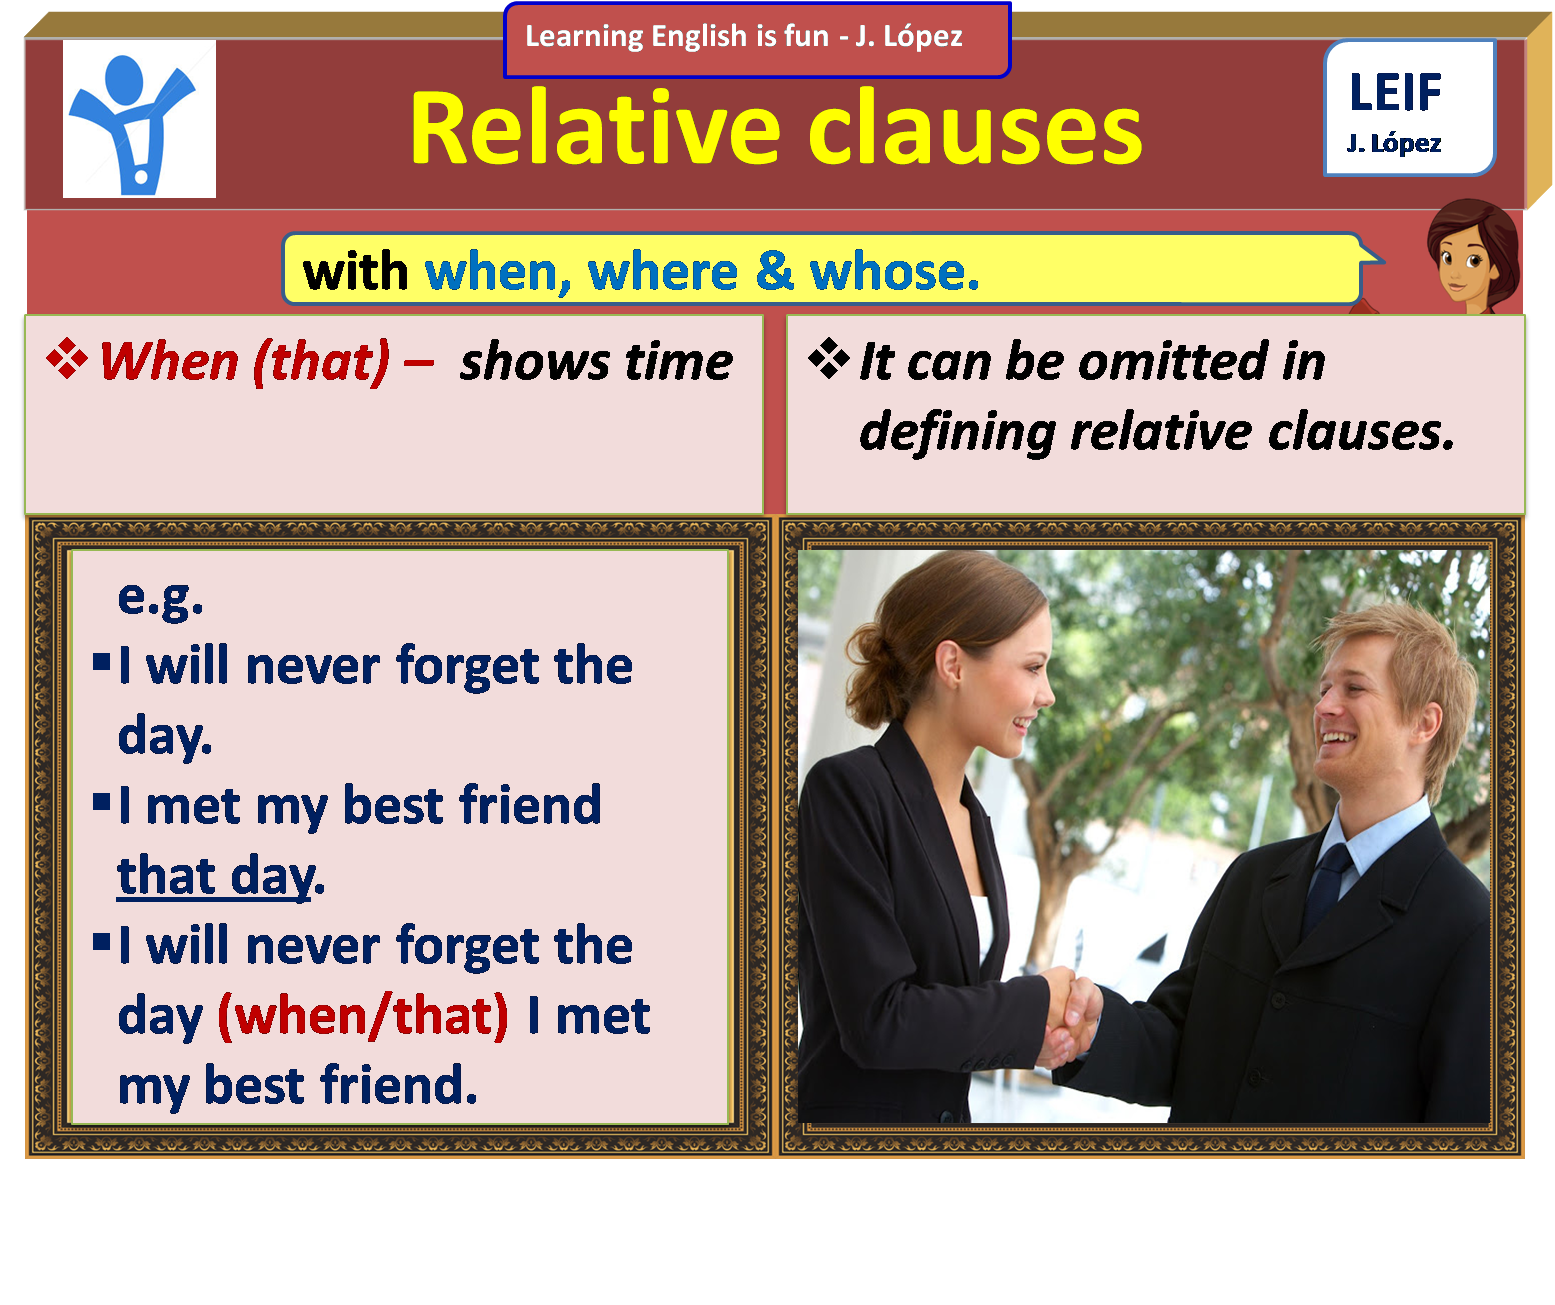 relative-clauses-exercises-pdf-with-answers